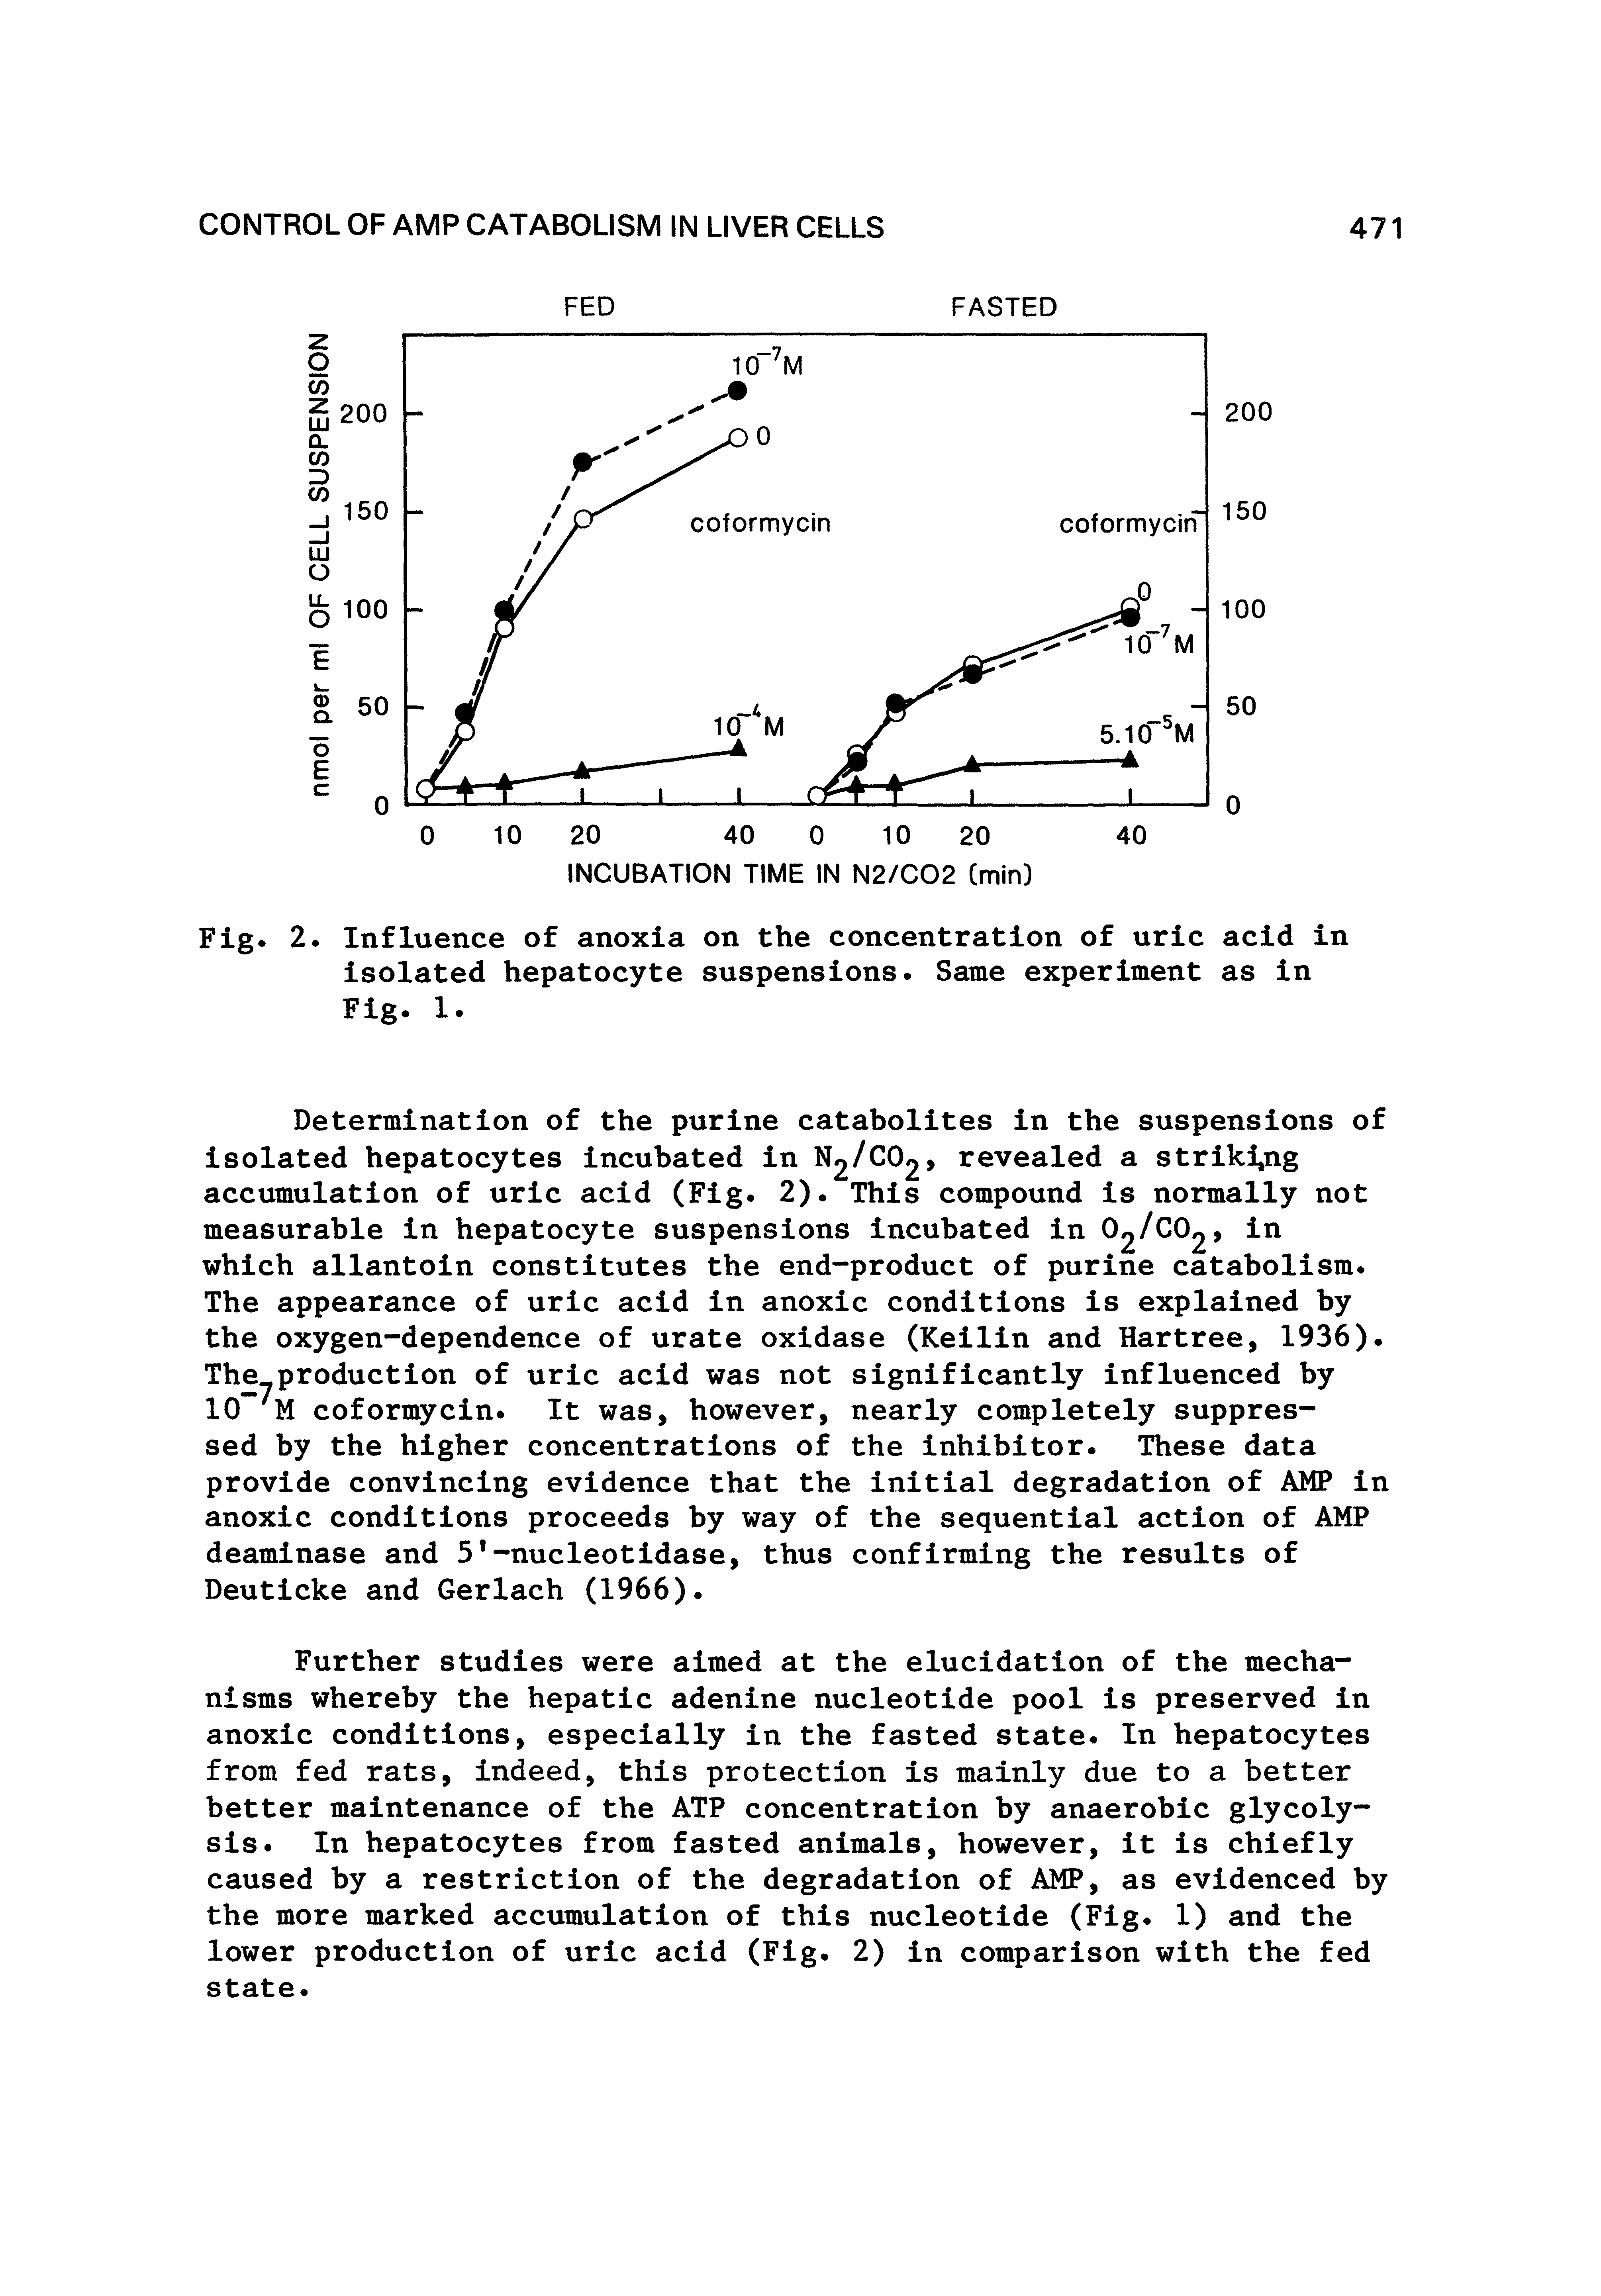 Fig. 2. Influence of anoxia on the concentration of uric acid in isolated hepatocyte suspensions. Same experiment as in Fig. 1.